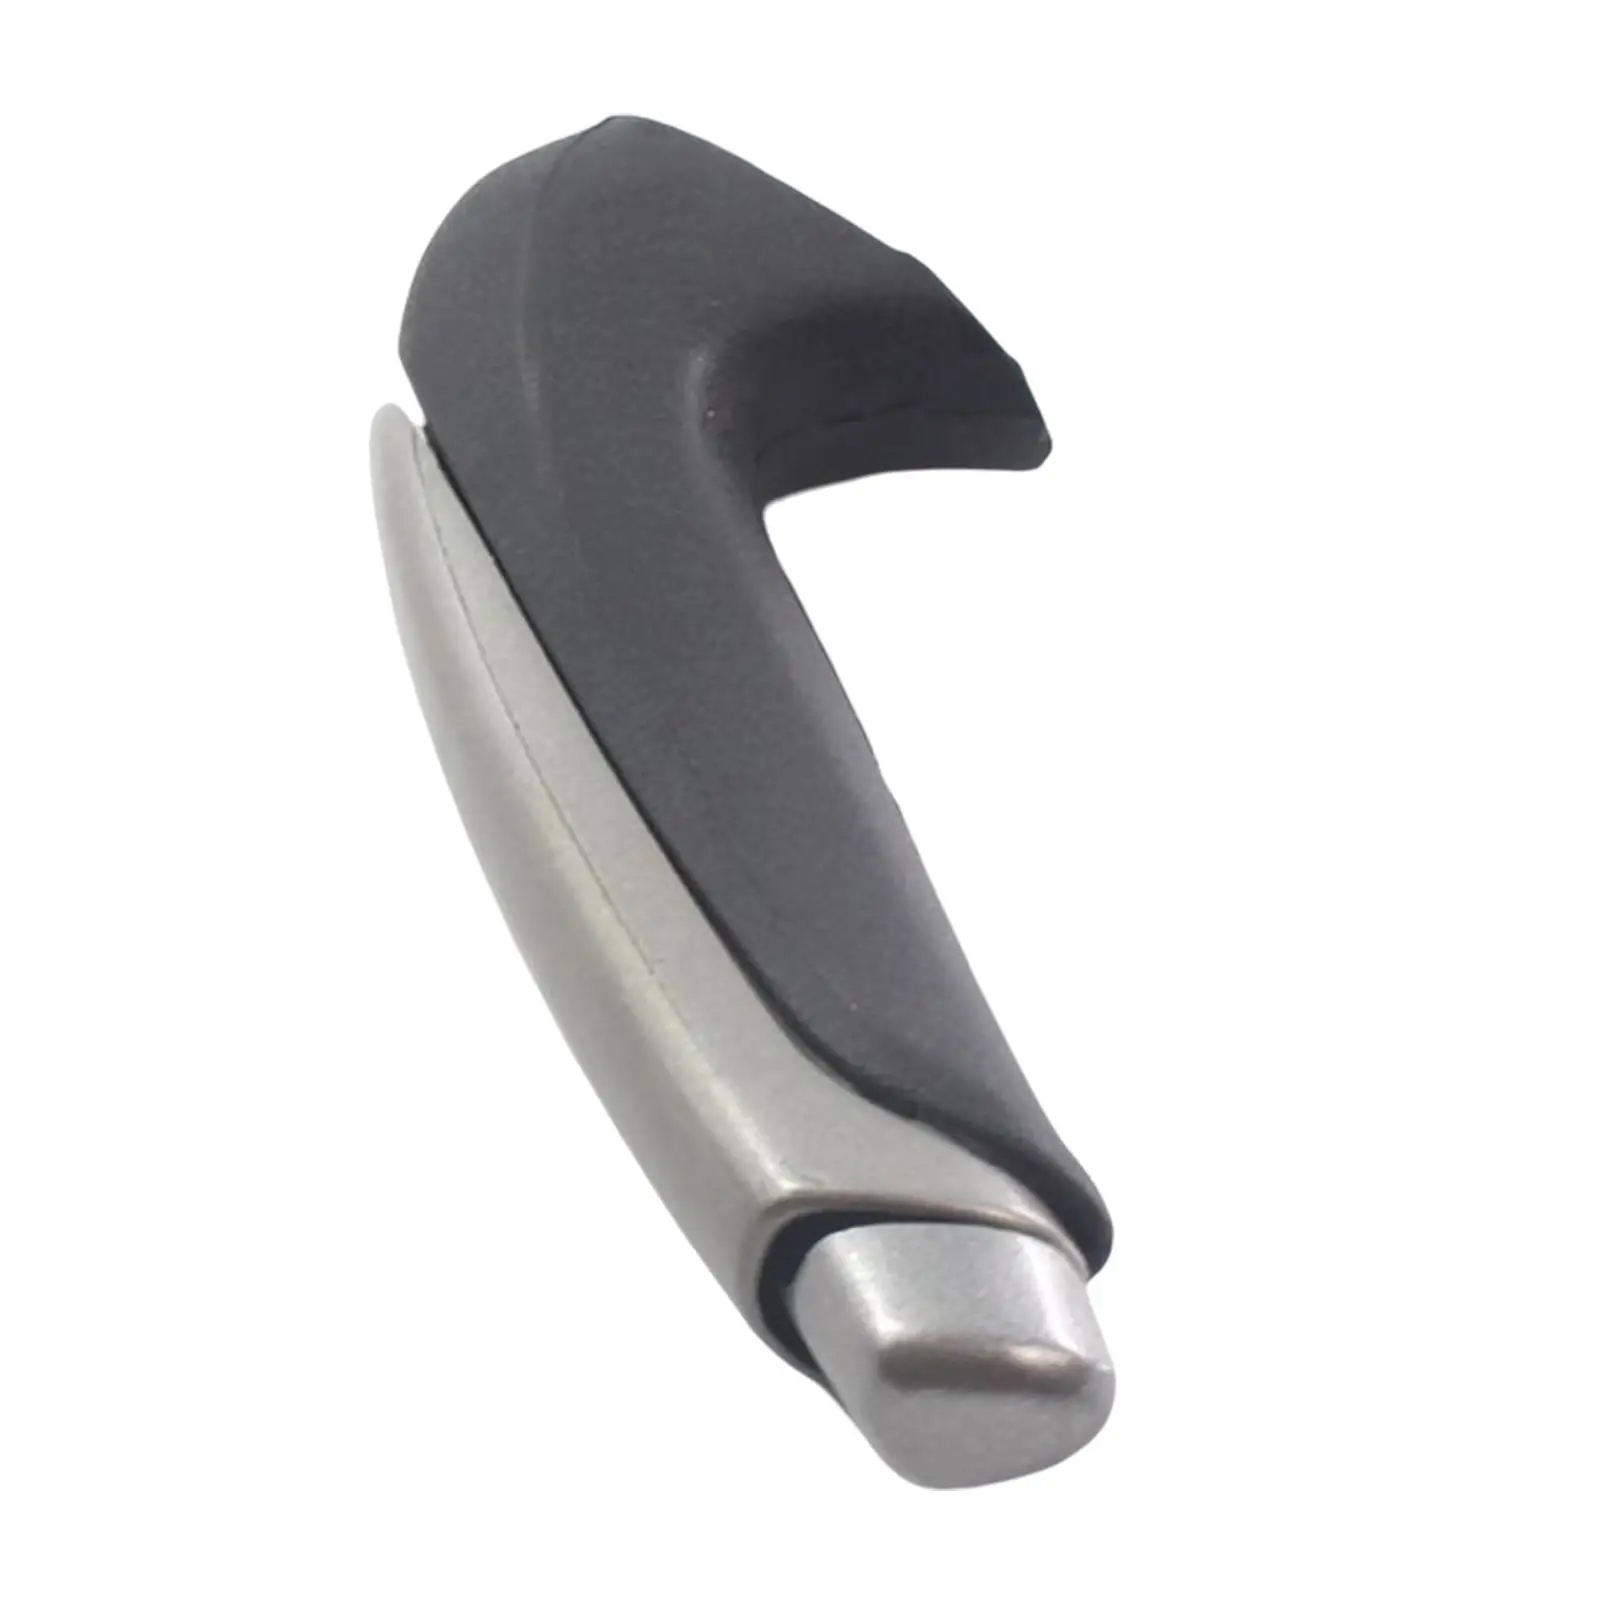 Handbrake Handle Lever Protector Cover for Replacement